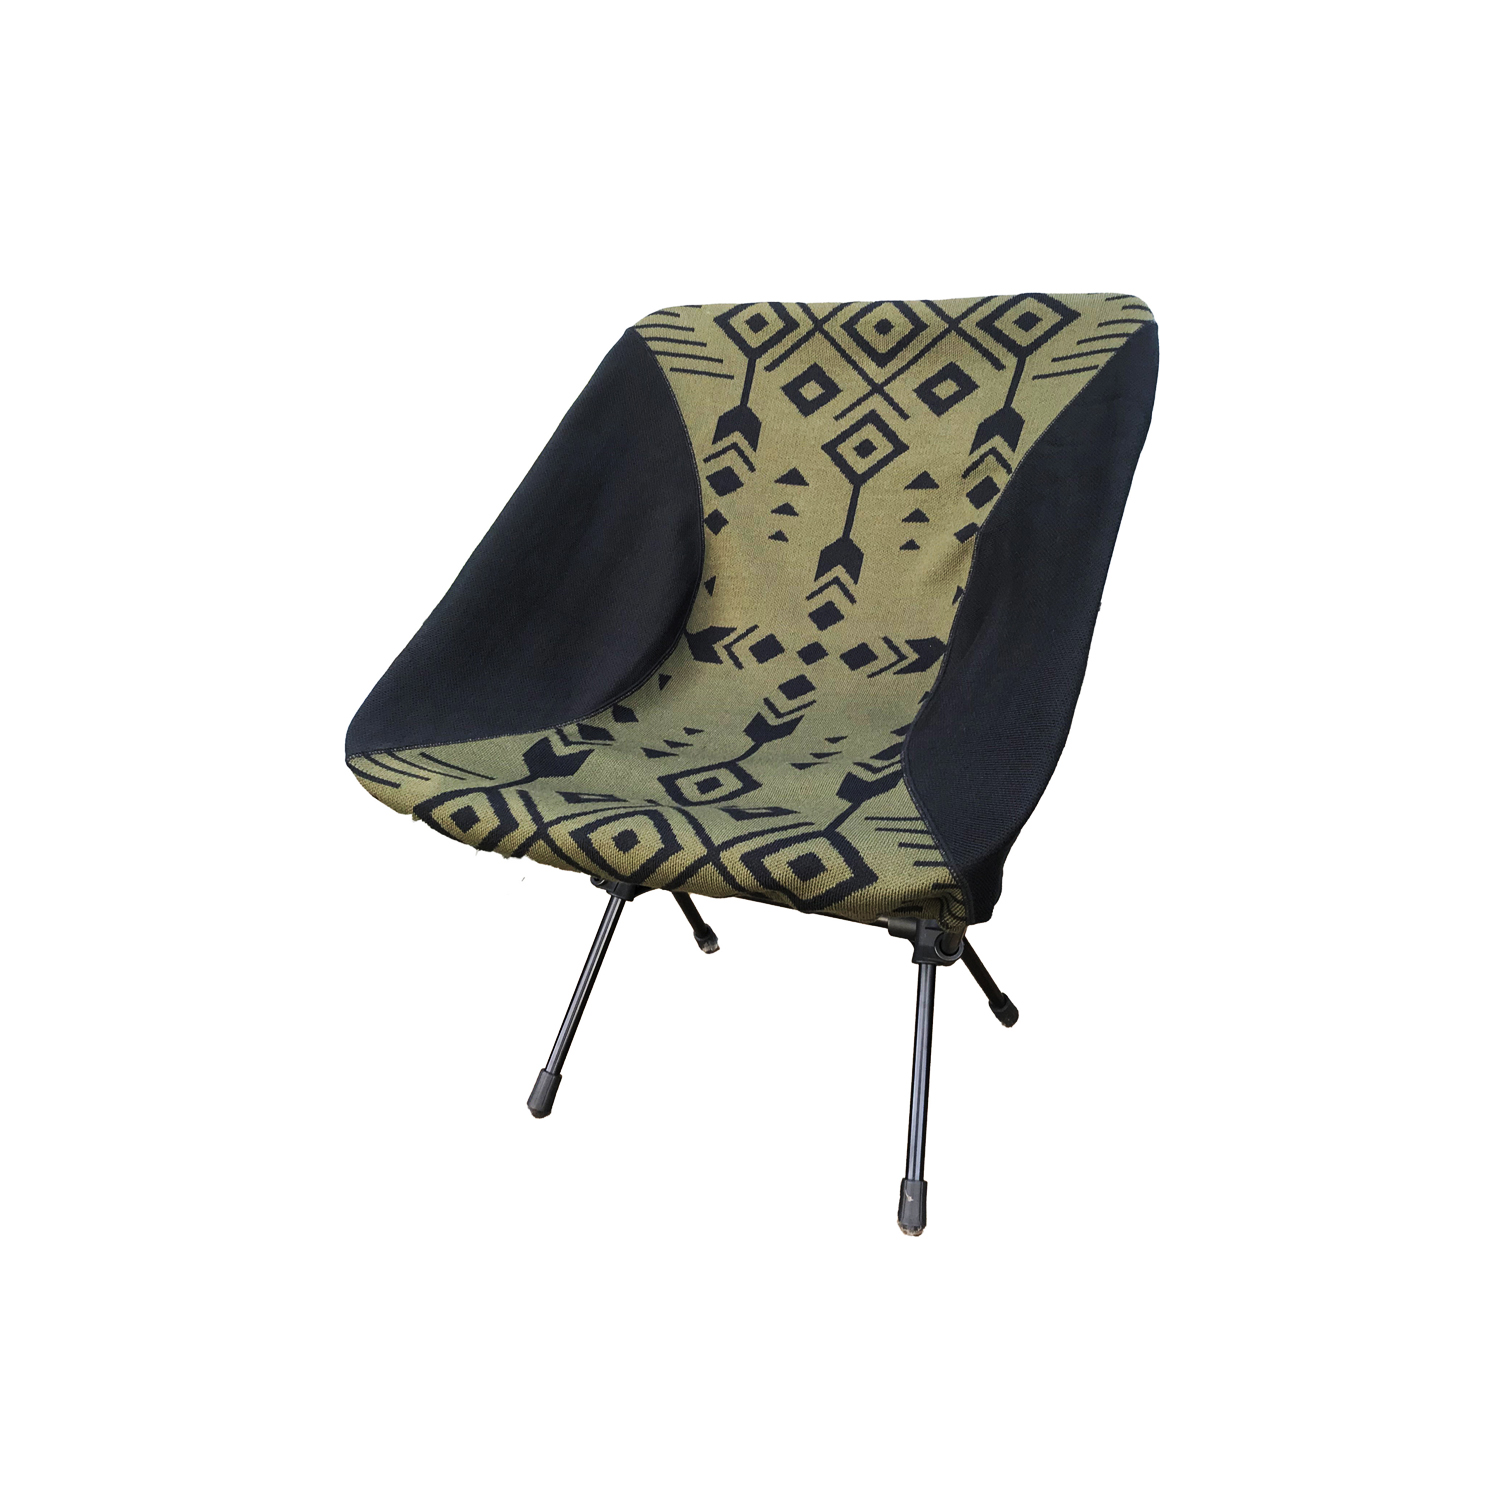 UTILITY CHAIR COVER